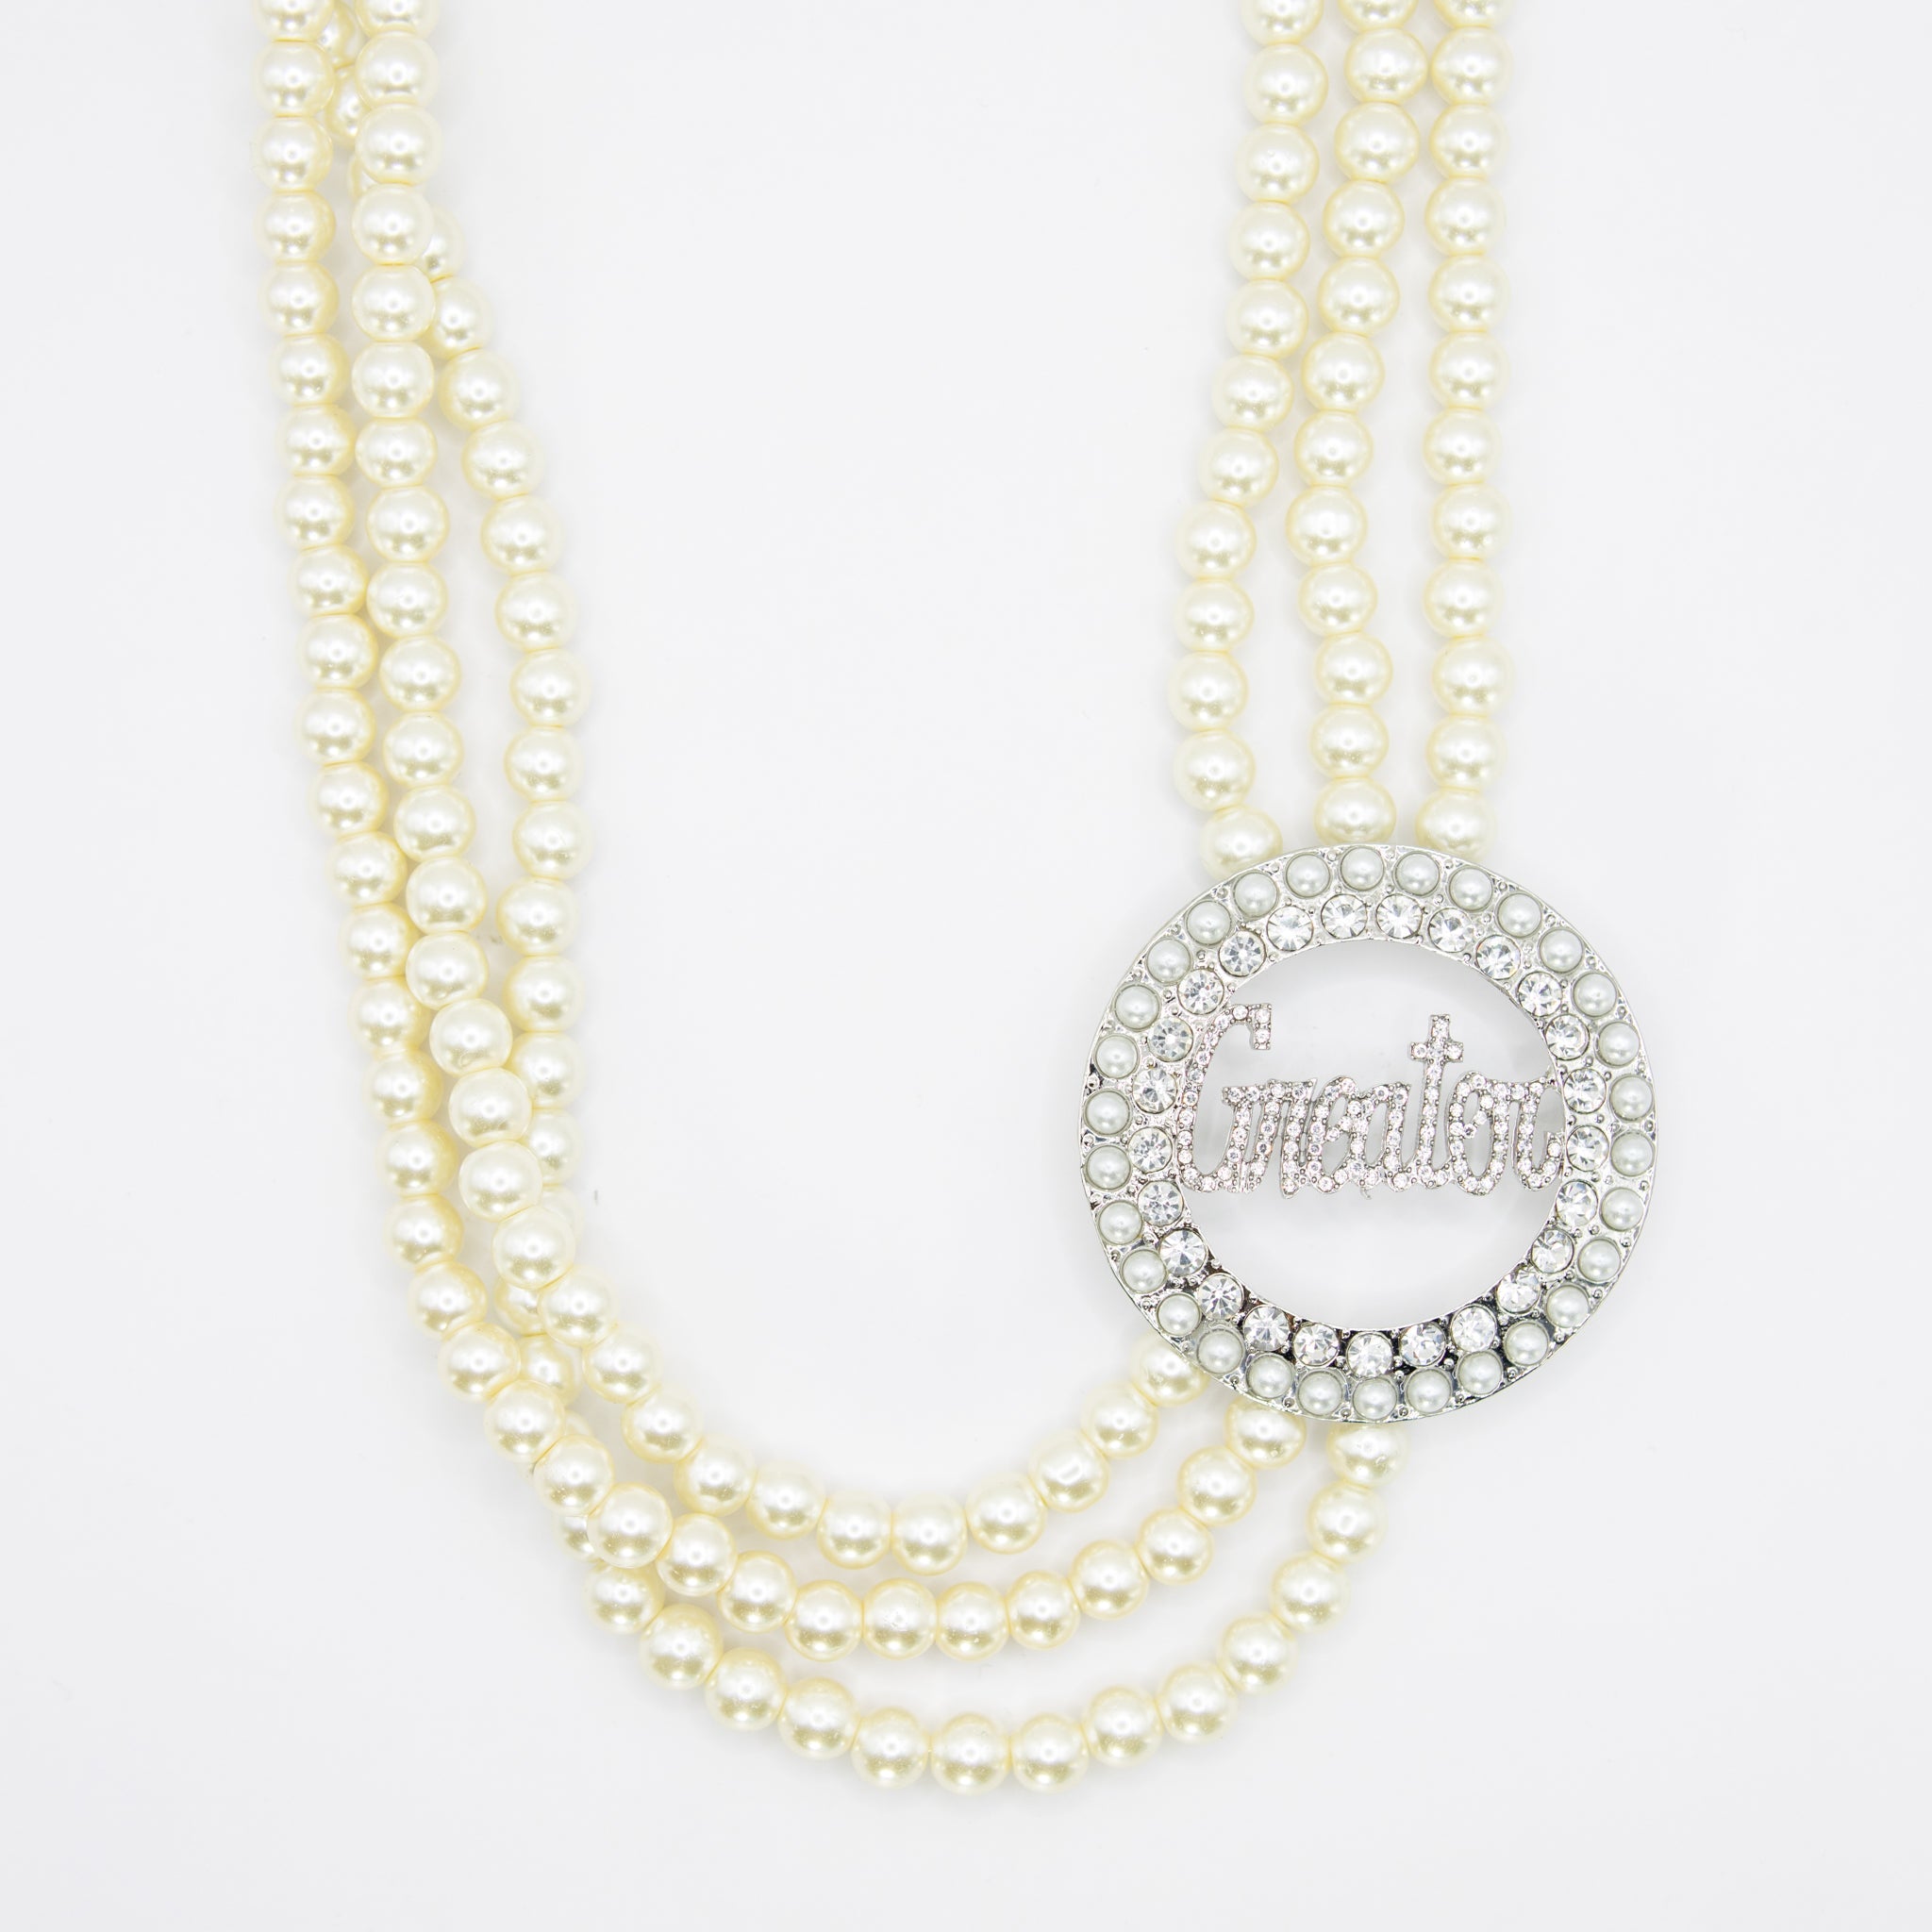 Greater Pearl & Bling Necklace - Diva Starr Boutique